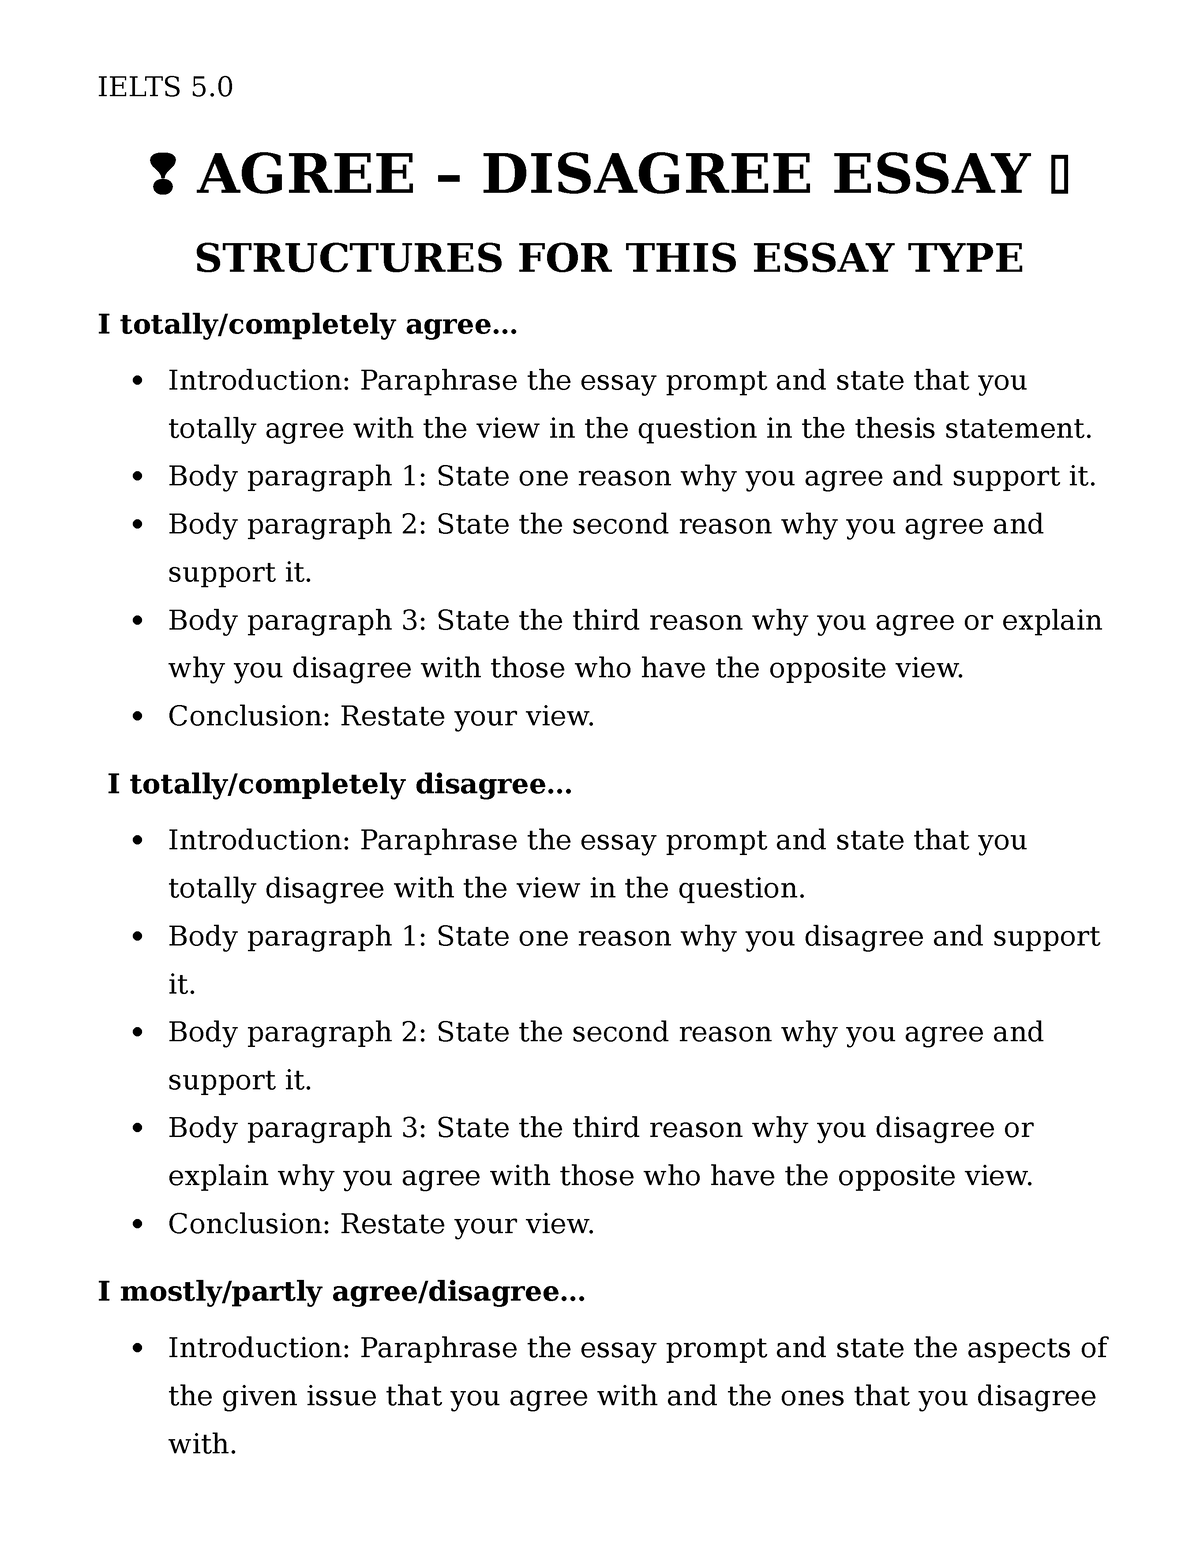 agree disagree essay structure